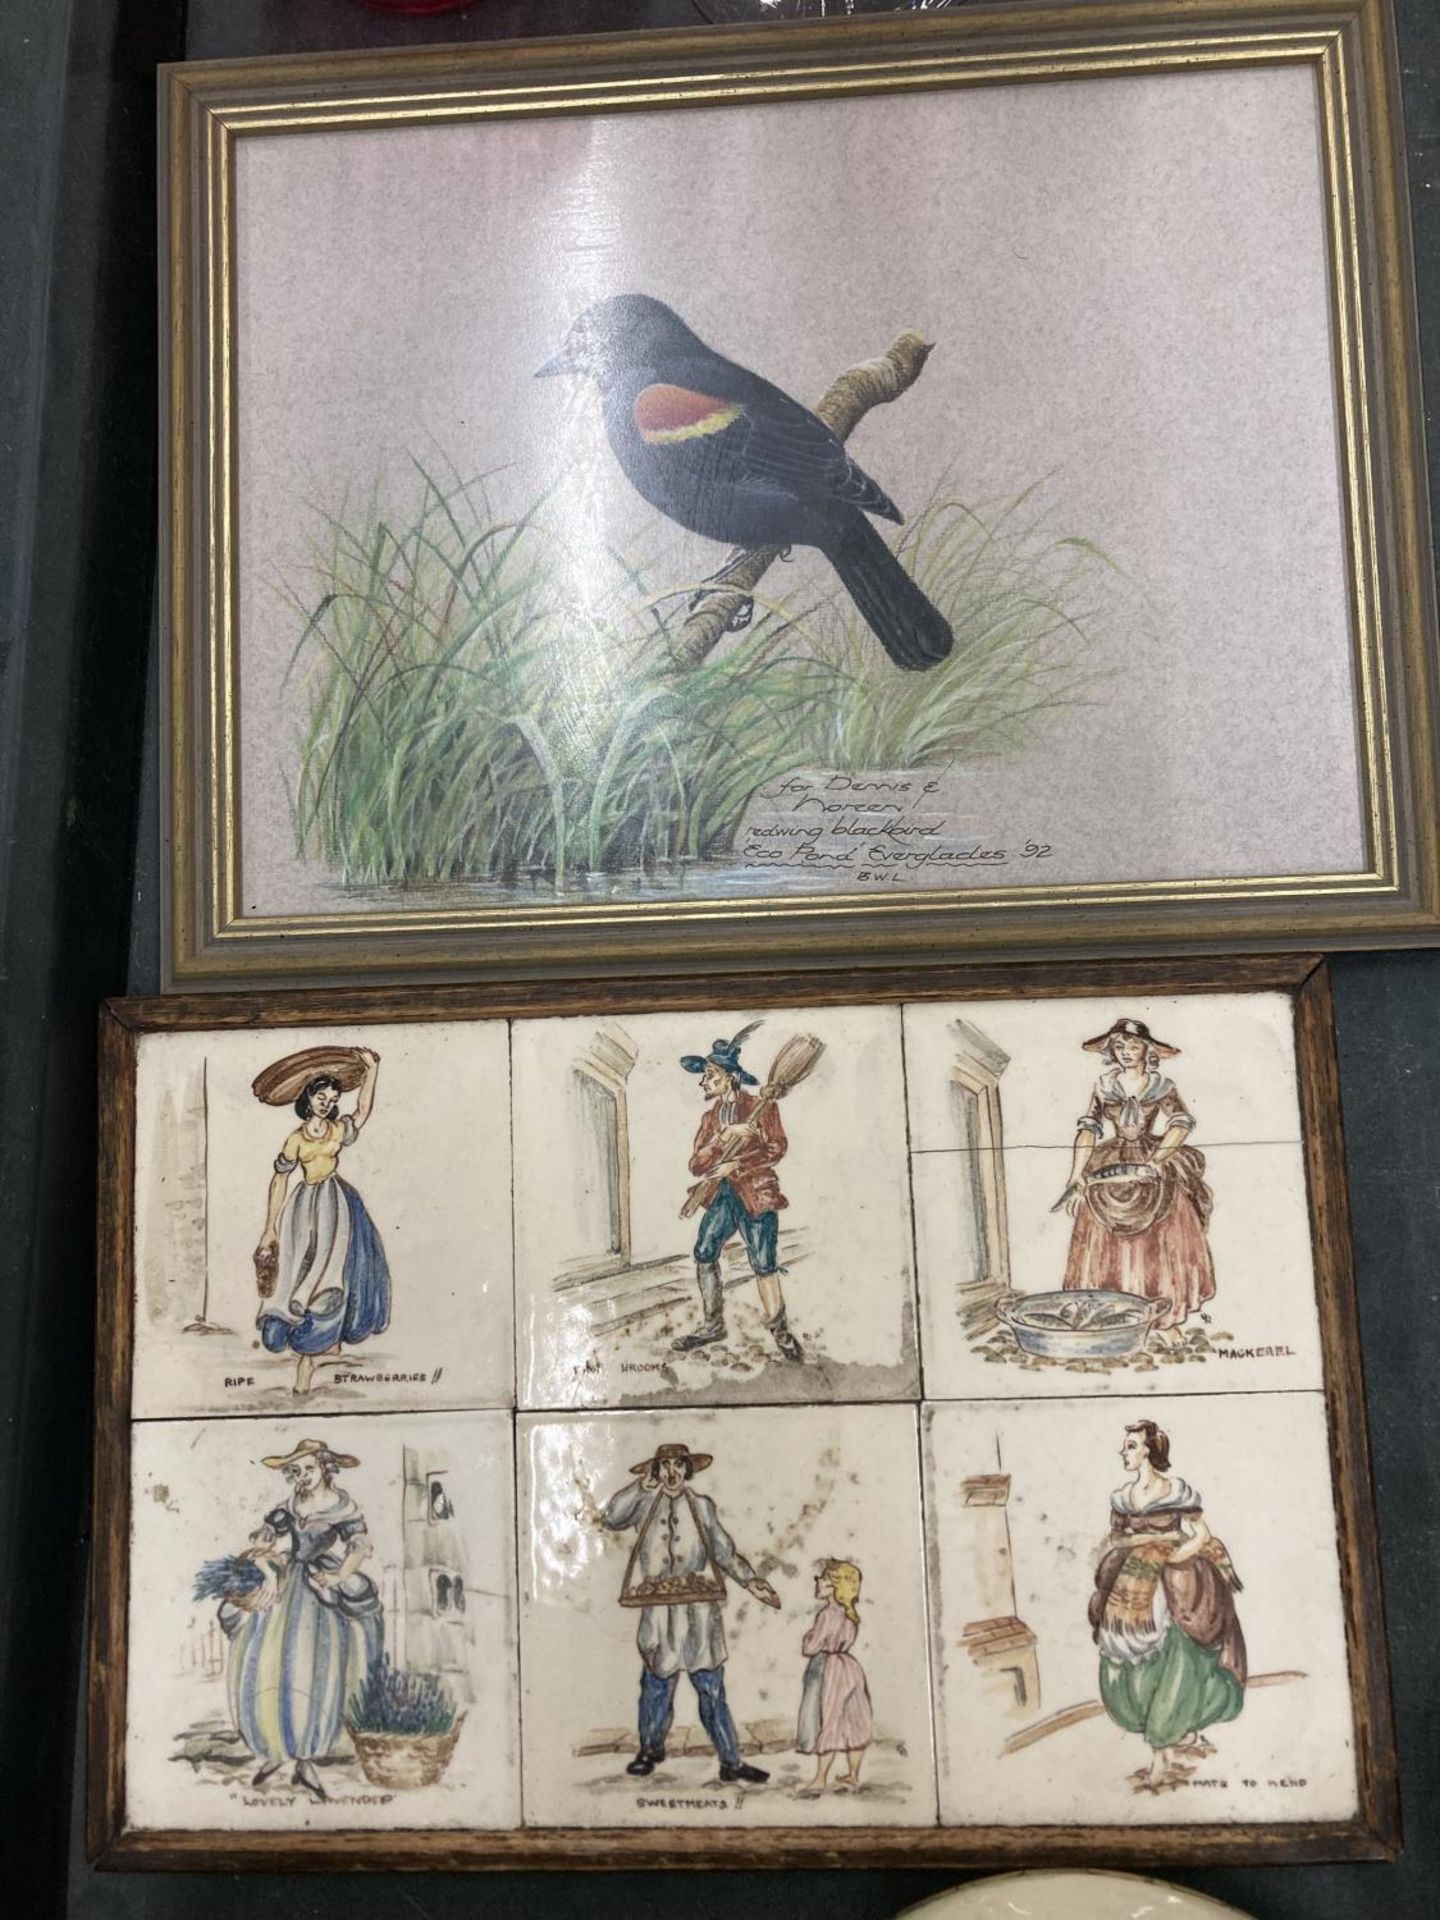 A FRAMED TILE OF A REDWING BLACKBIRD AND SIX FURTHER TILES IN A FRAME